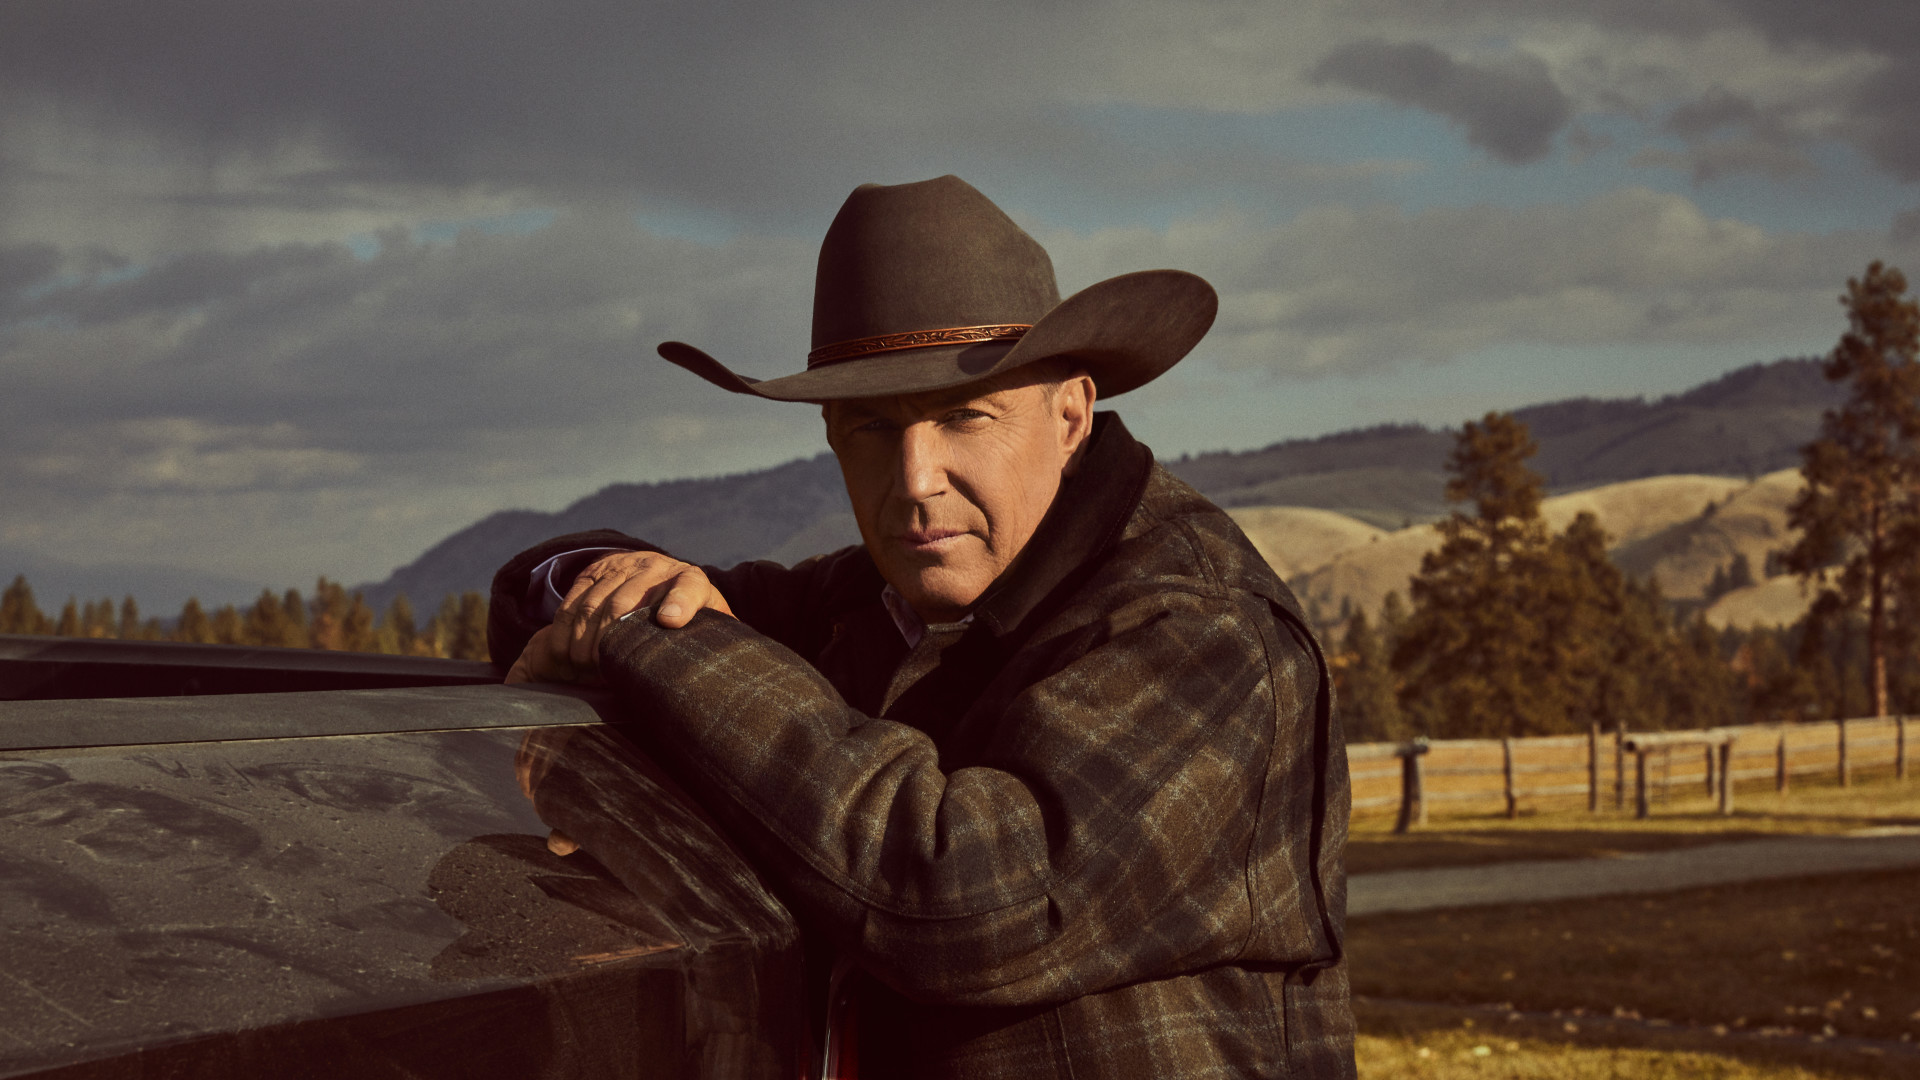 Yellowstone Season 3: When Will It Be Released On Paramount? - DroidJournal